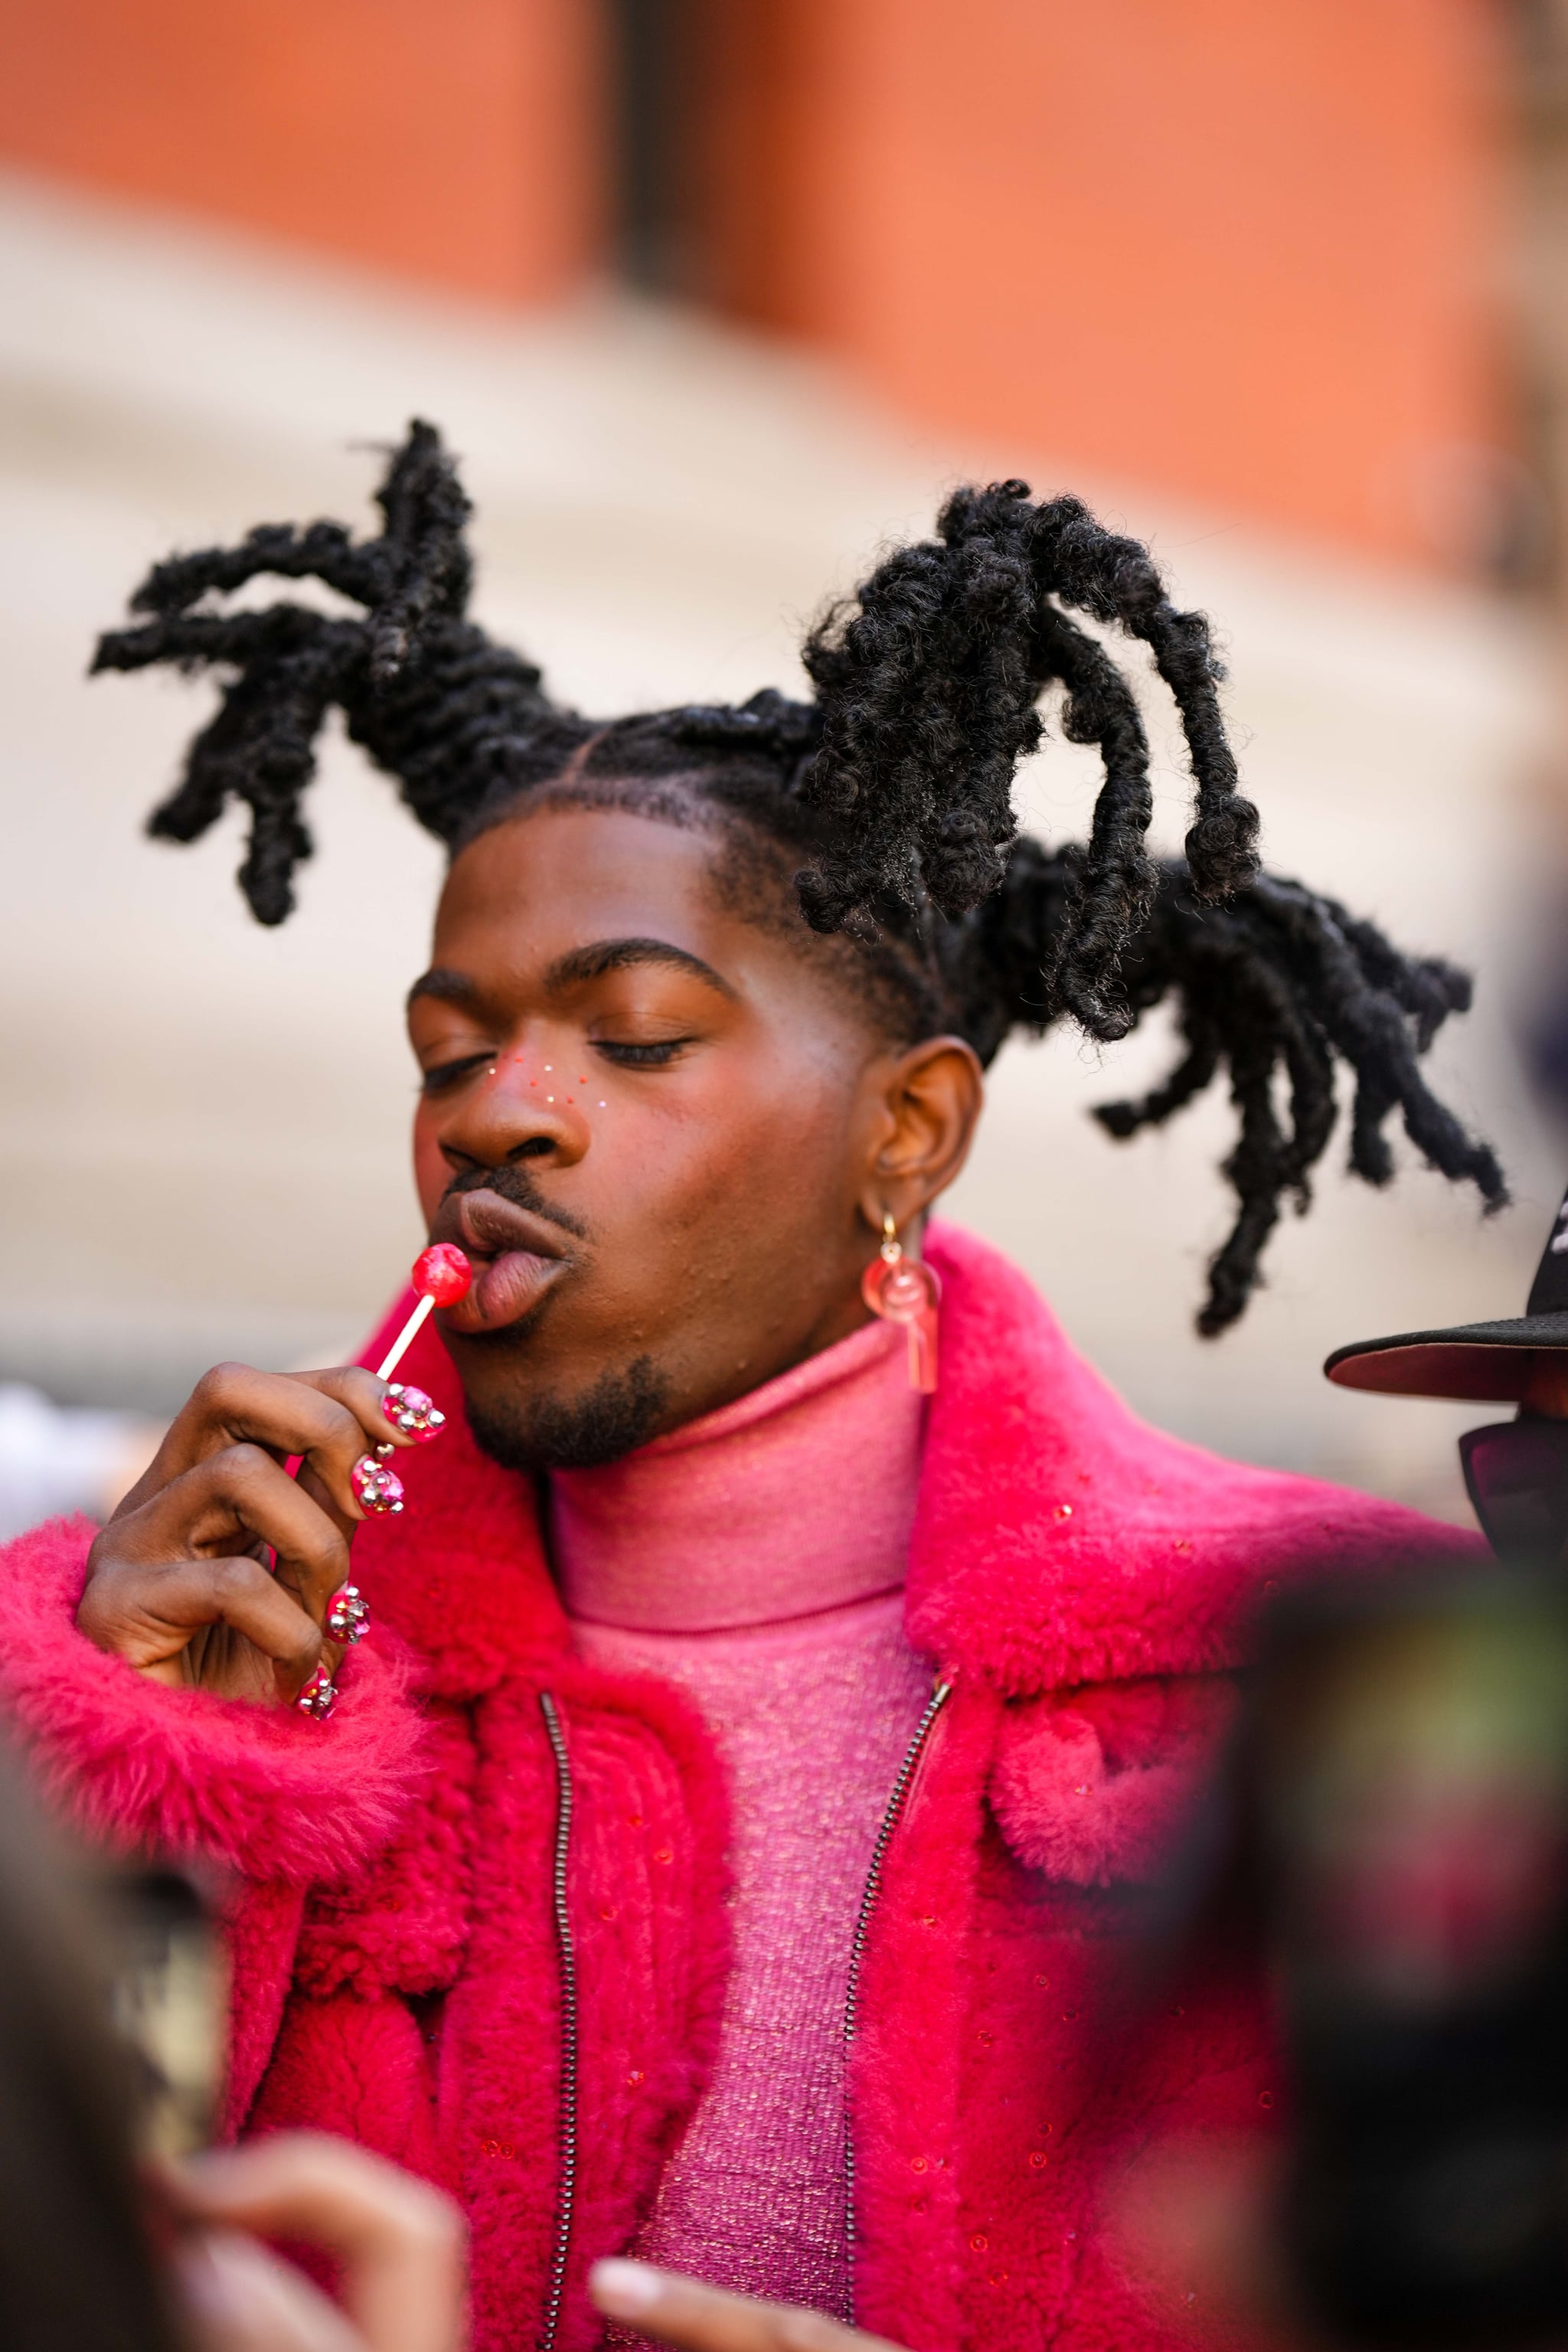 NEW YORK, NEW YORK - FEBRUARY 13: Lil Nas X wears red pendant earrings, a pink glitter wool turtleneck pullover, a red fluffy oversized long coat, outside Coach, during New York Fashion Week, on February 13, 2023 in New York City. (Photo by Edward Berthelot/Getty Images)